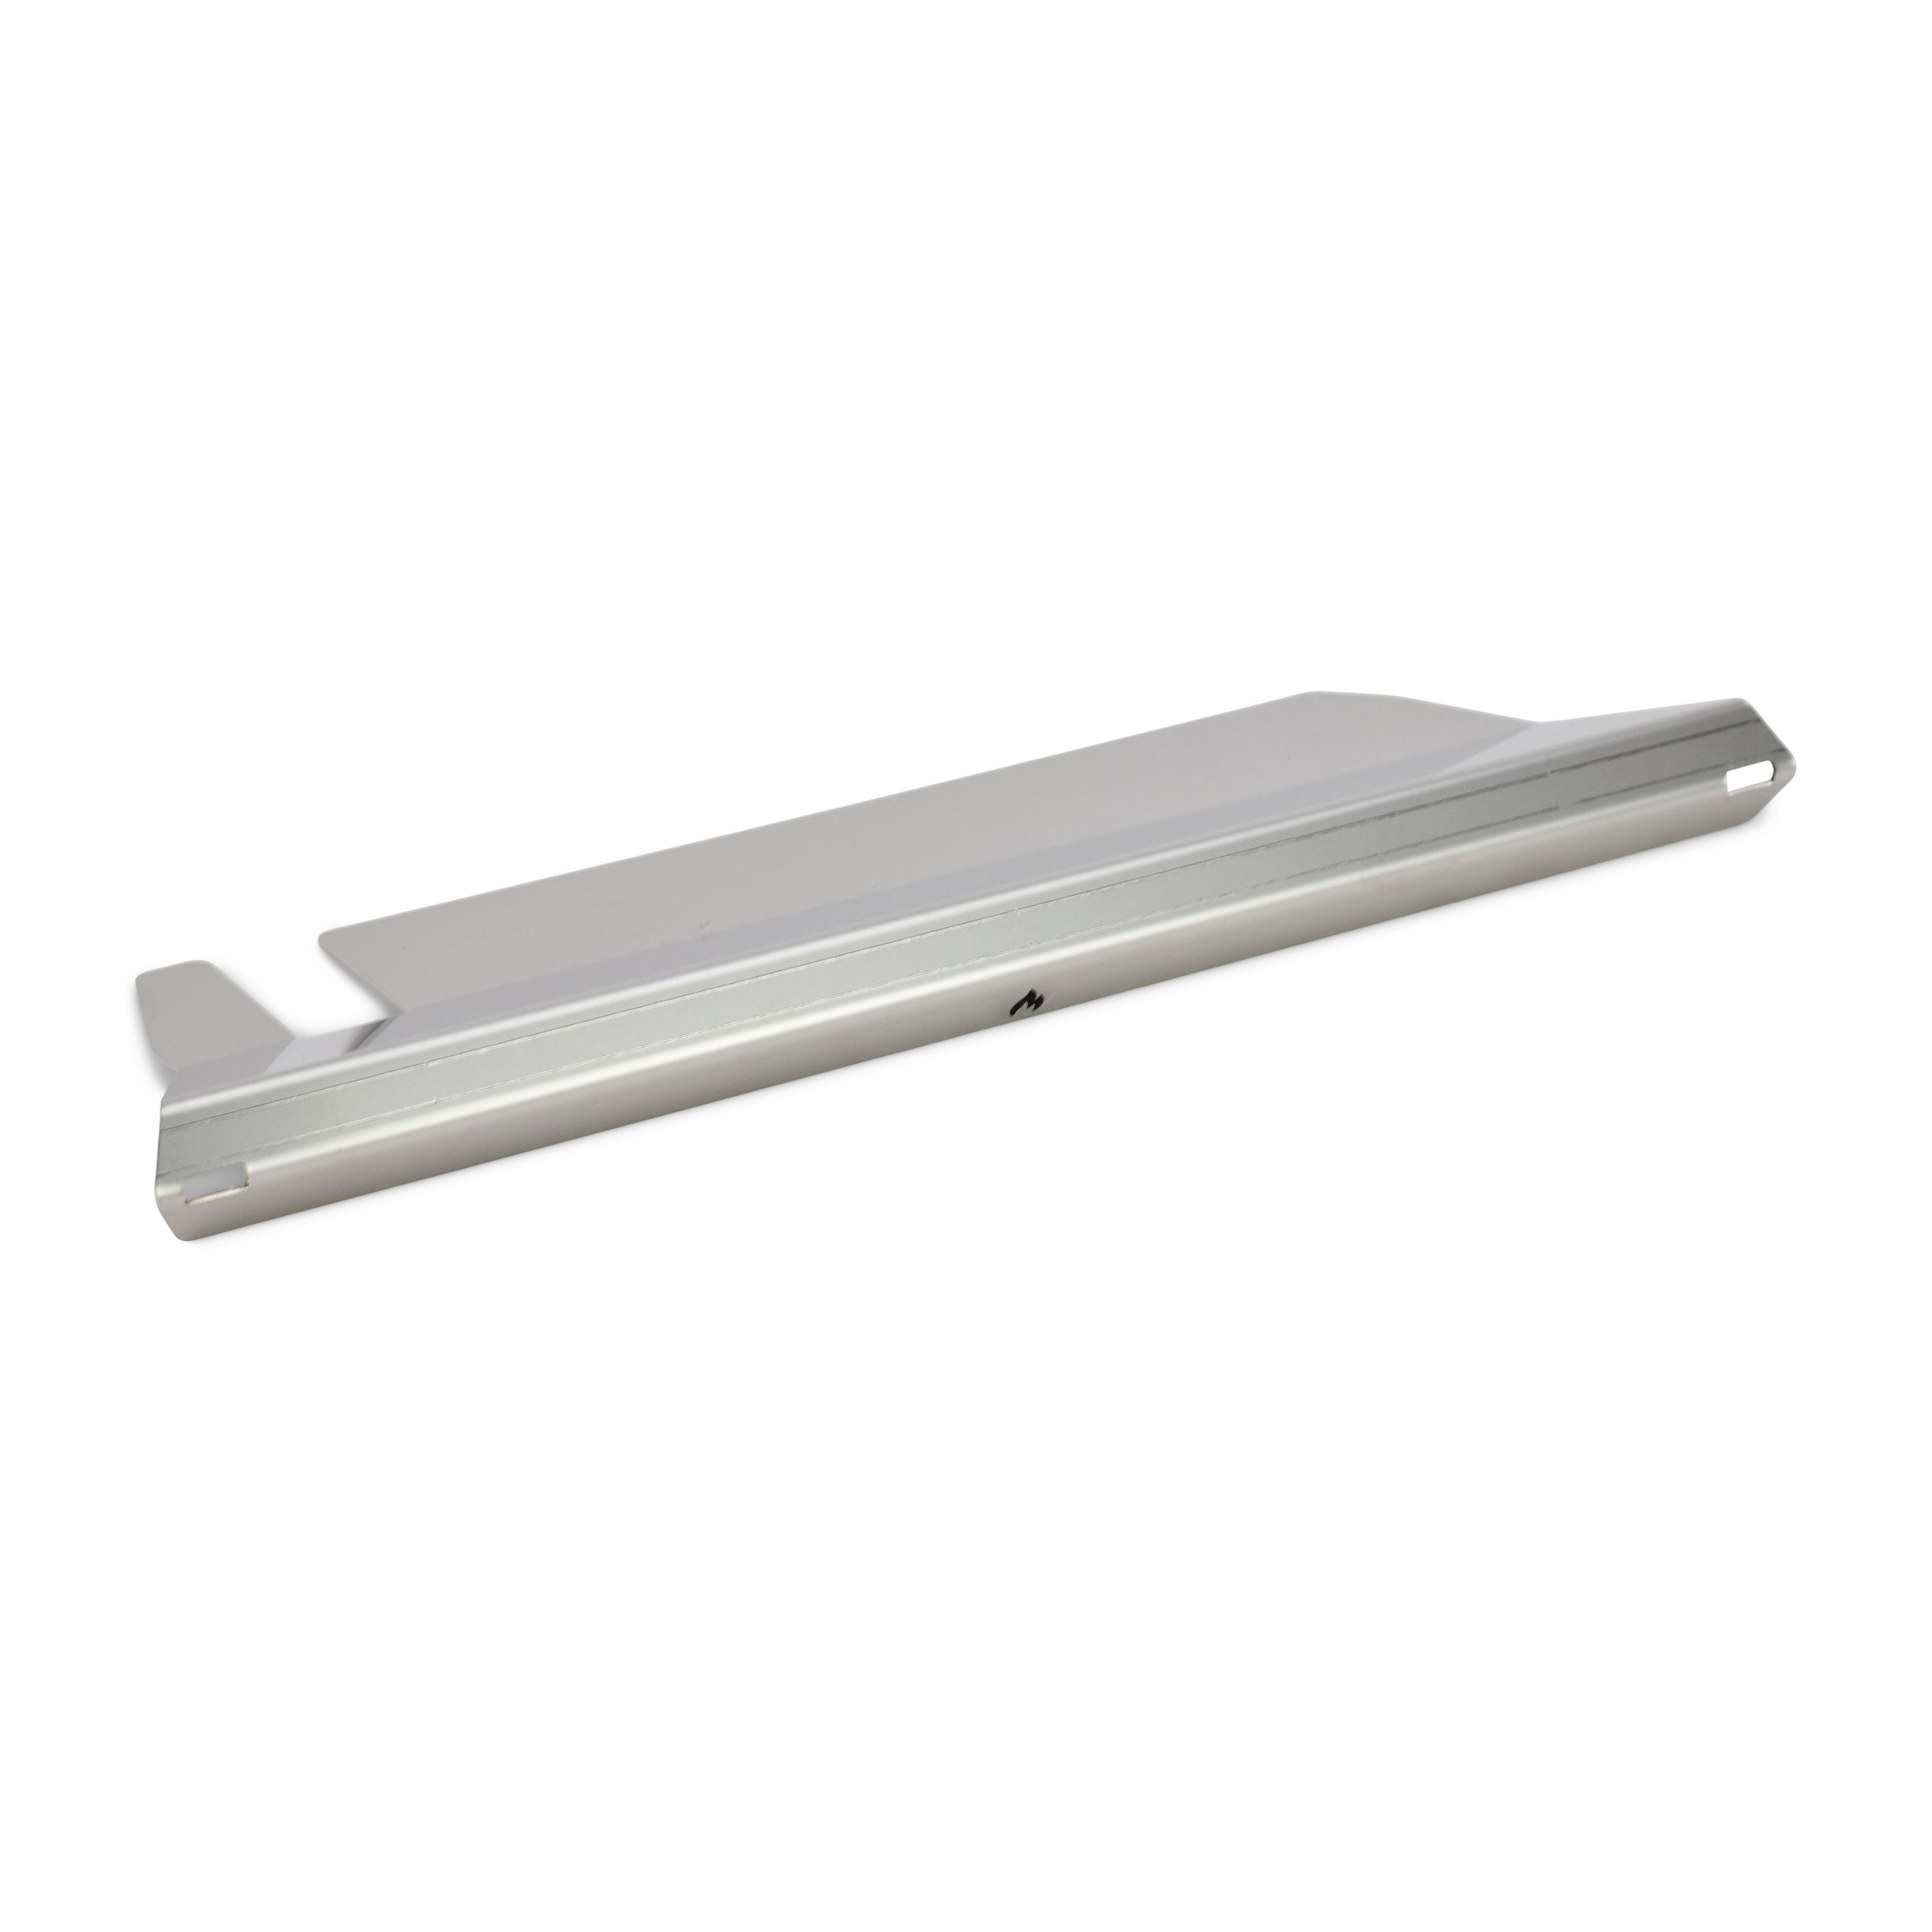 Stainless steel Flav-R-Zone divider for Broil King Signet and Sovereign Extra solid